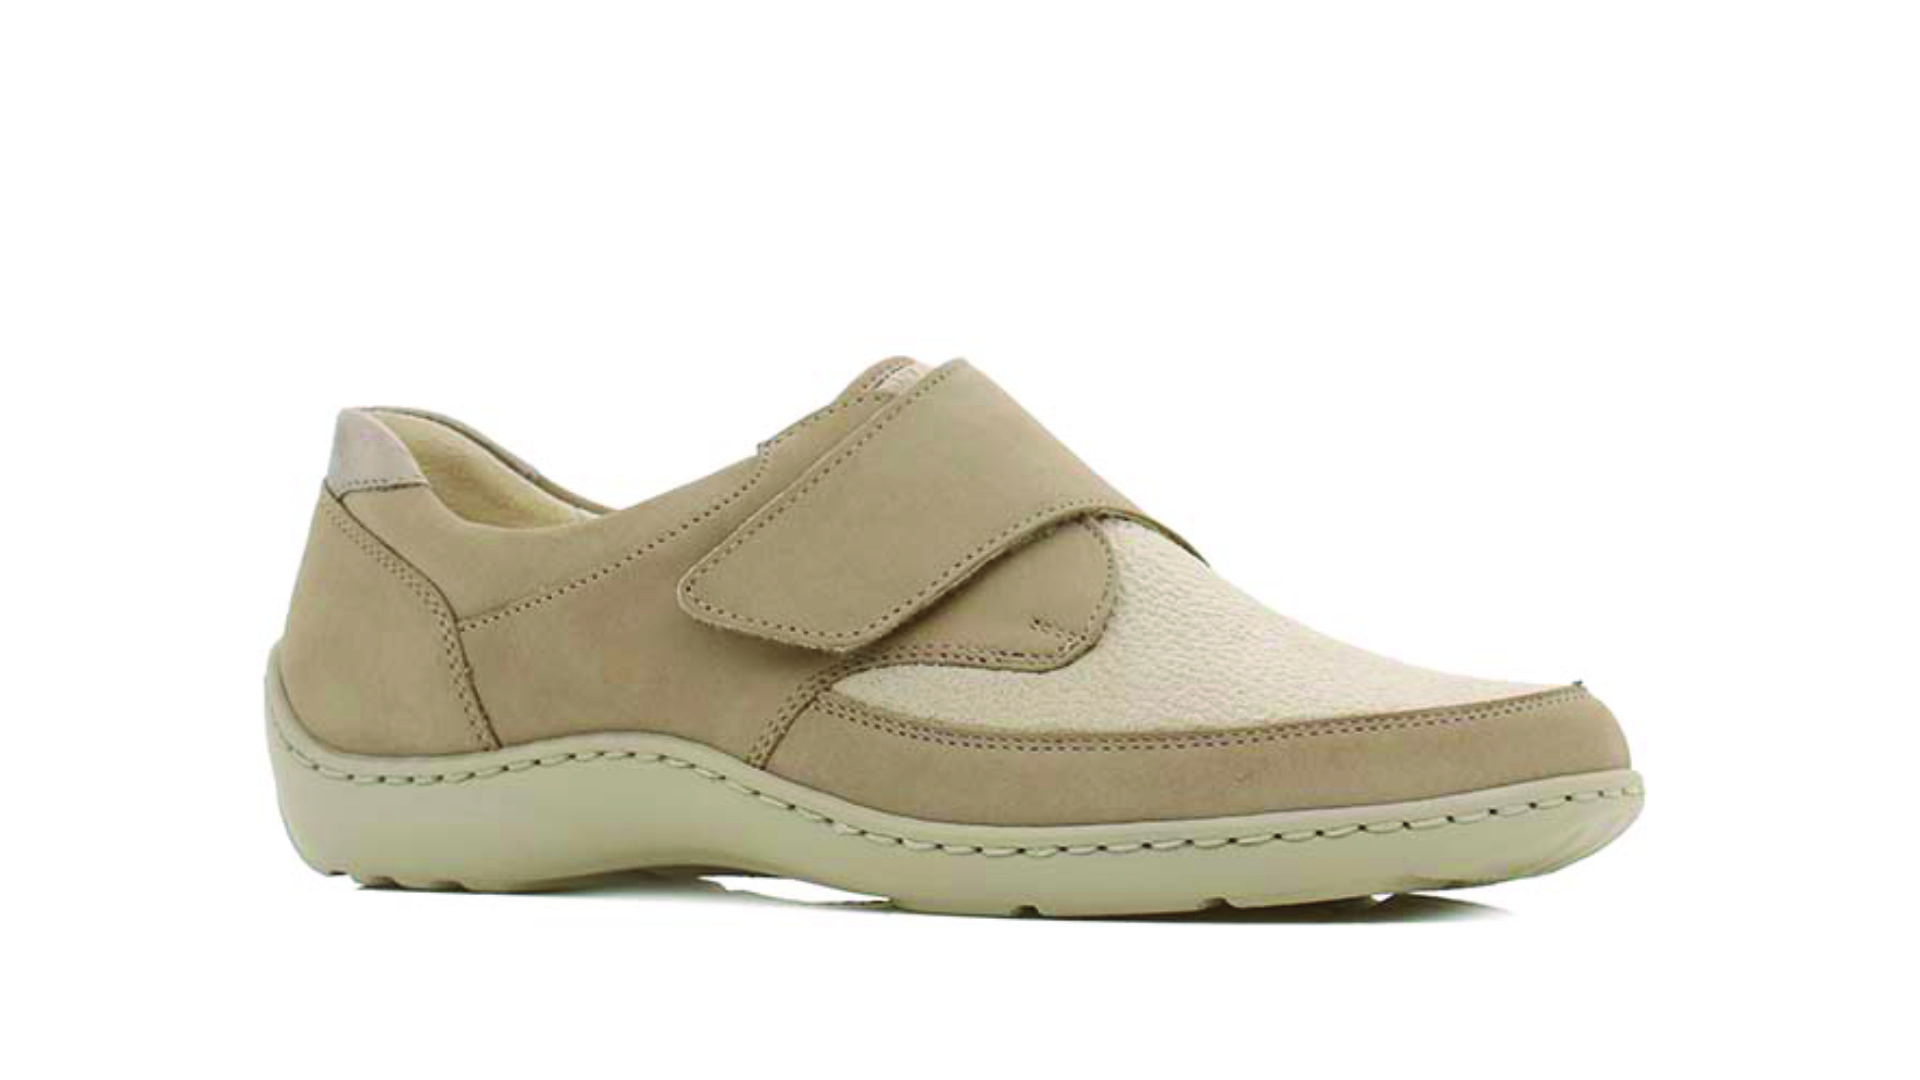 A pair of beige Waldlaufer Henni shoes, showcasing the soft upper and ample room for toes that make them suitable for hammer toes.